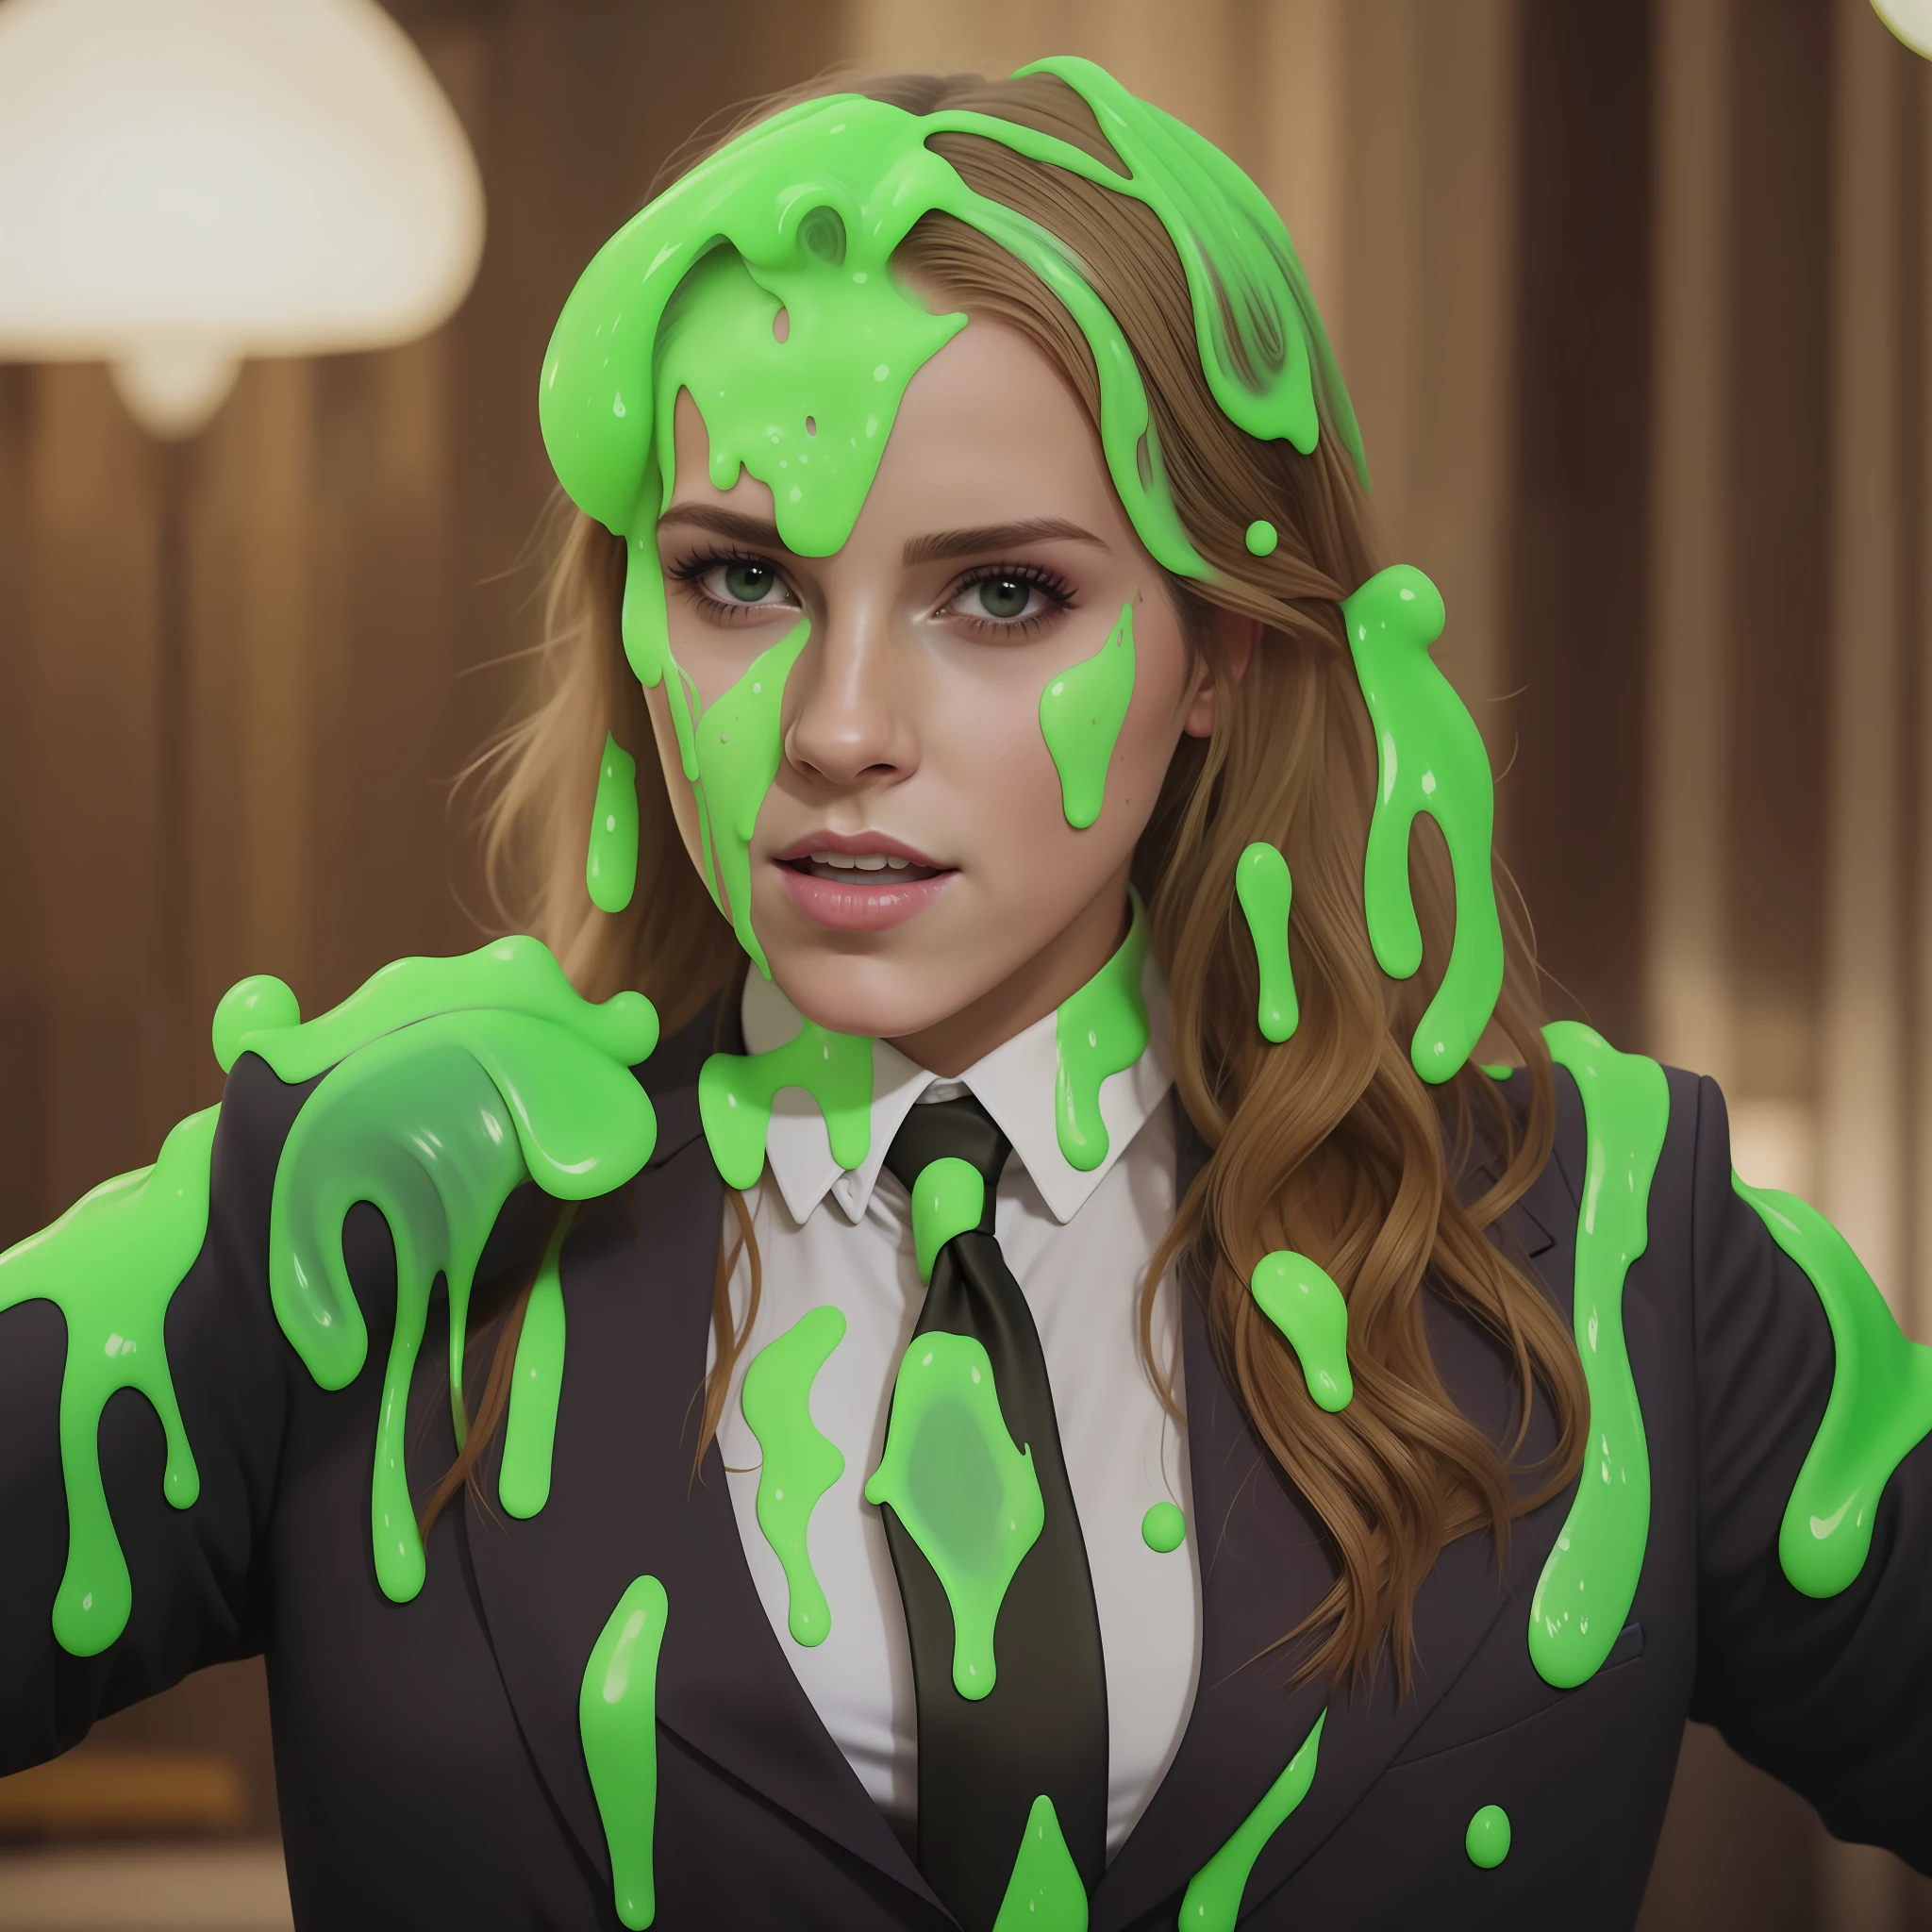 Scarlett Johansson as woman with green paint on her face and tie, woman with a tie and a suit covered in paint, covered in slime!!, green slime dripping, green slime, dripping in neon paint, green slime everywhere, oozing slime, skin painted with green, character is covered in liquid, gooey skin, splattered goo, fully covered in colorful paint, colourful slime, cream dripping on face, slime, there is a woman sitting at a table with a green paint on her face, green slime everywhere, green slime dripping, covered in slime!!, a hyperrealistic schoolgirl, hyperrealistic schoolgirl, green slime, character is covered in liquid, oozing slime, inspired by Yanagawa Nobusada, realistic schoolgirl, emma watson as an avocado chair with green paint on her face and tie, dripping in neon paint, covered in slime!!, green slime dripping, green slime, green slime everywhere, oozing slime, neon face paint, fangs and slime, splattered goo, slime, a hyperrealistic , colourful slime, color portrait, skin painted with green, hyperrealistic schoolgirla tie and shirt covered in green paint, covered in slime!!, suit and tie with green slime on her face, green slime everywhere, green slime dripping, highly detailed vfx portrait of, highly detailed vfx portrait, green slime, emma watson as she-hulk, character is covered in liquid, covered in slime!!, oozing slime, emma watson as an avocado, emma watson as hulk, vfx movie closeup